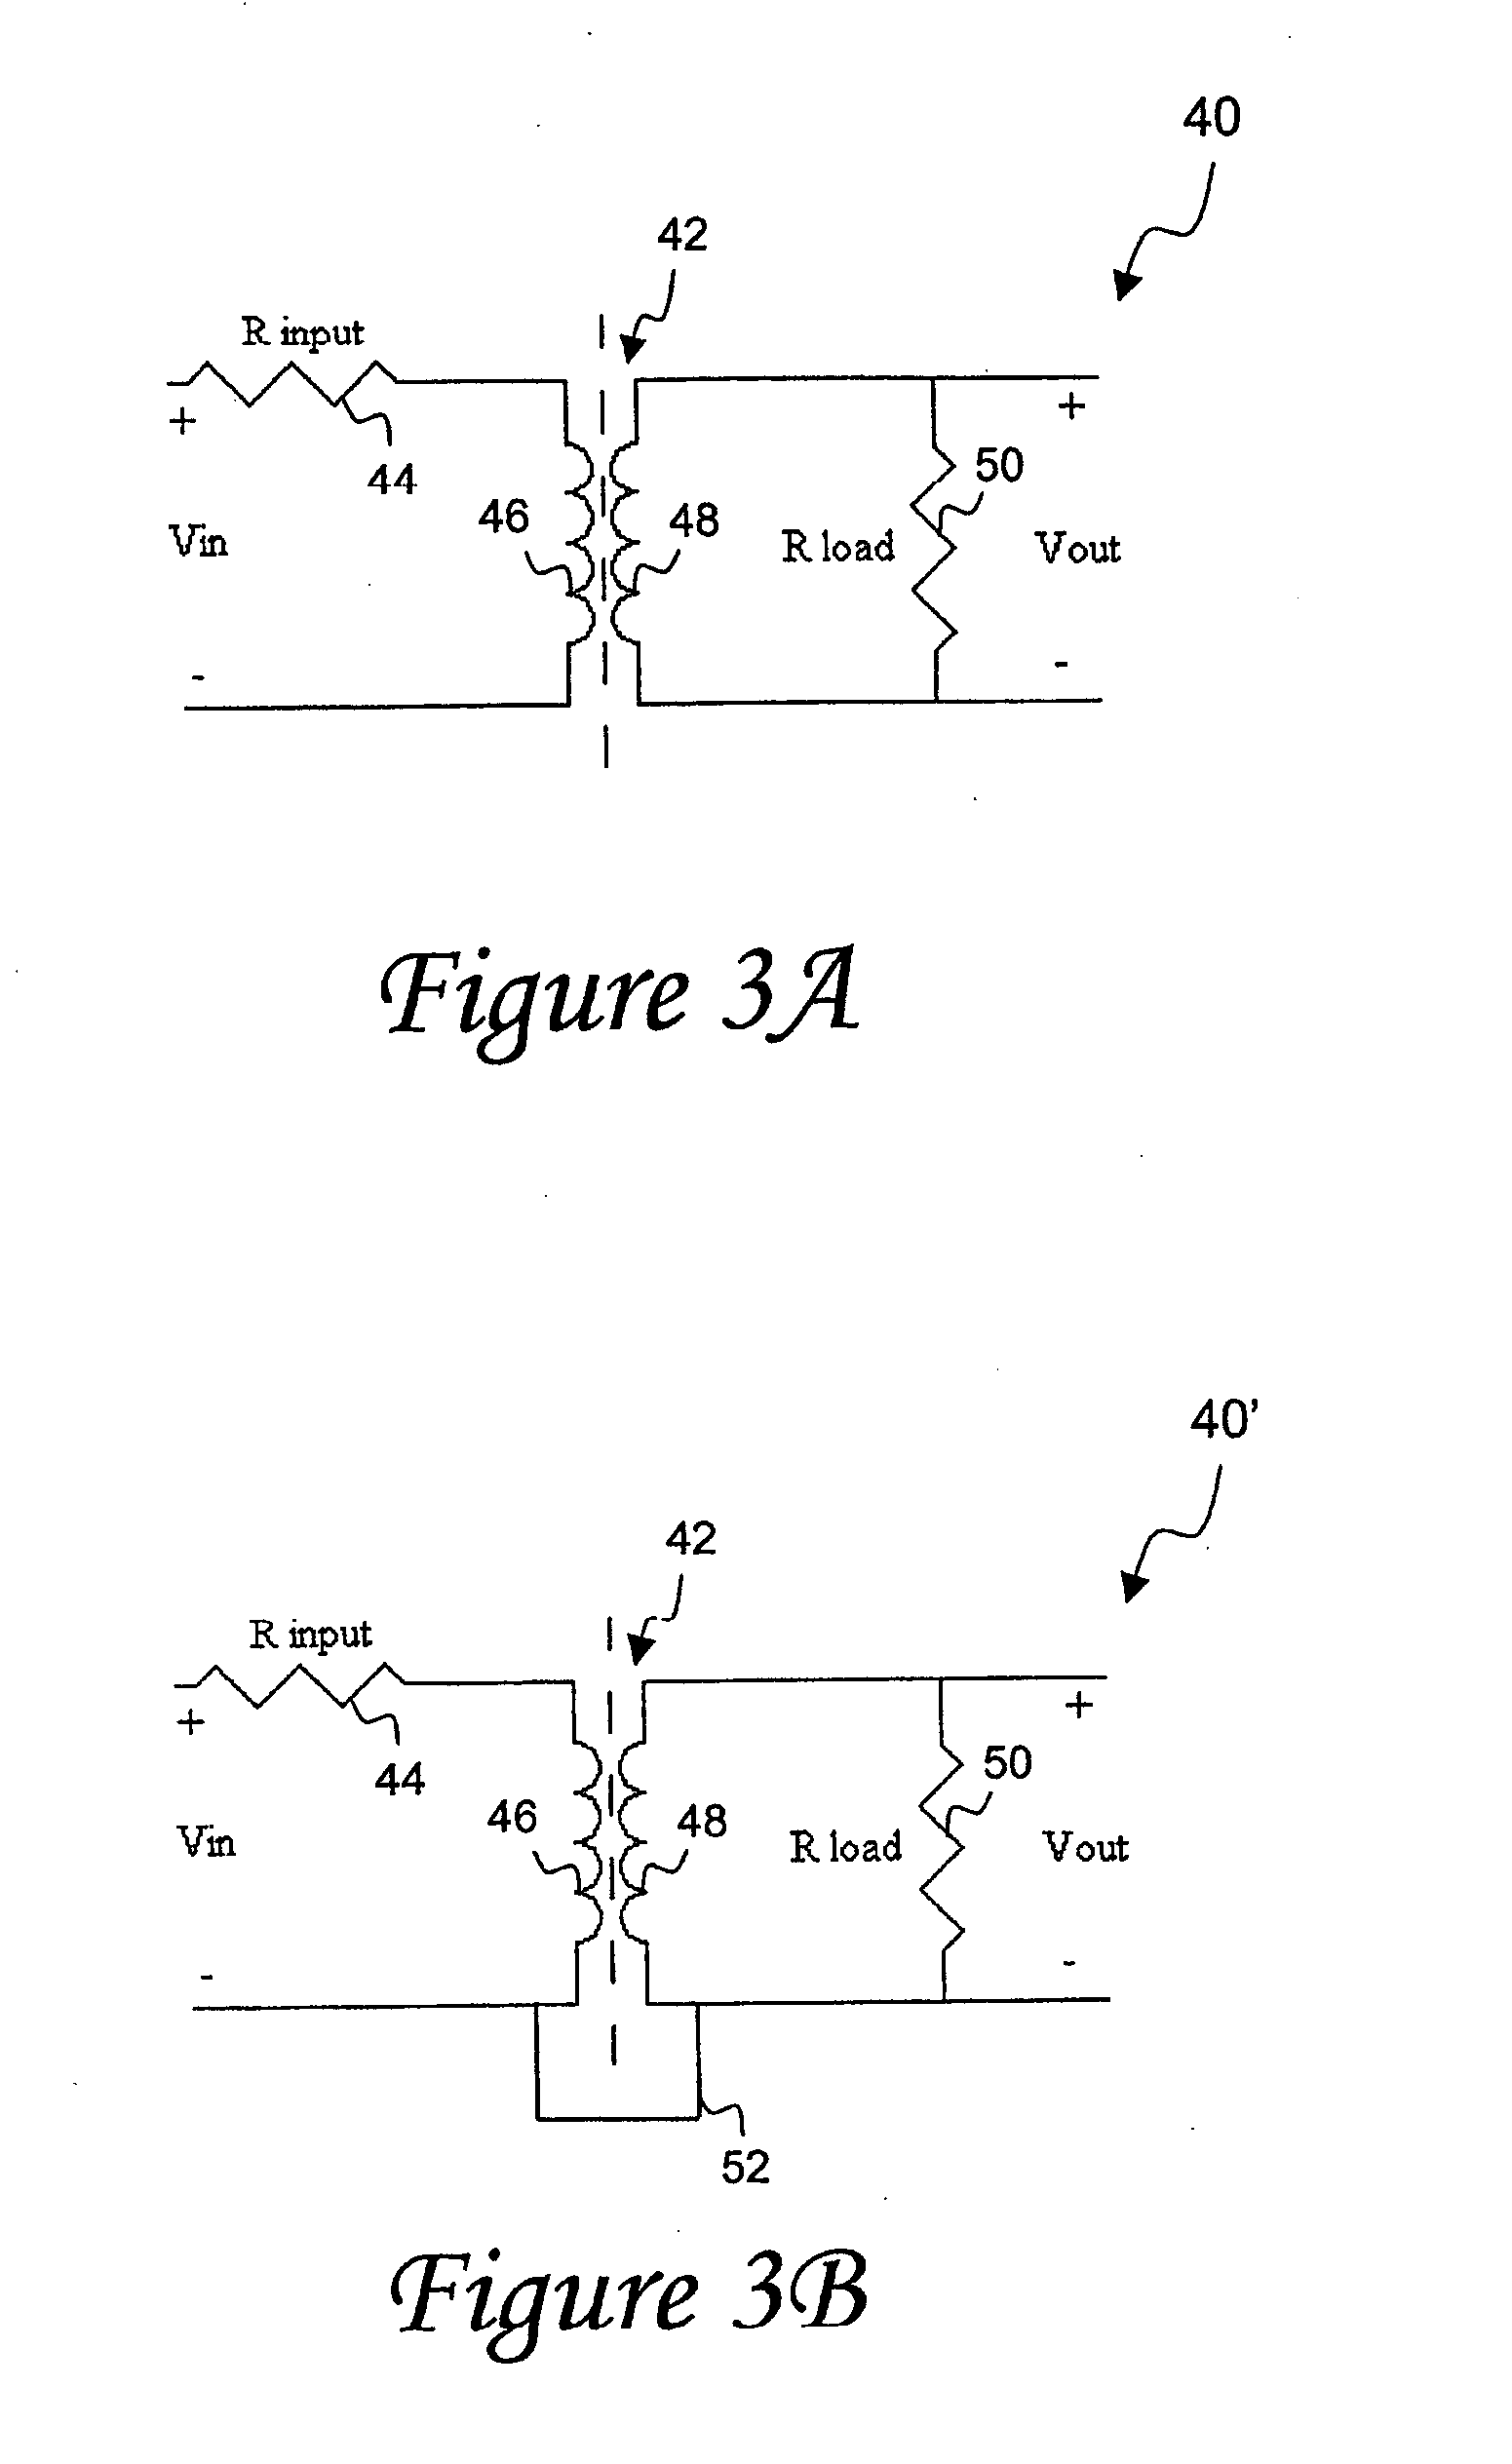 System and method for acquiring voltages and measuring voltage into an electrical service using a non-active current transformer